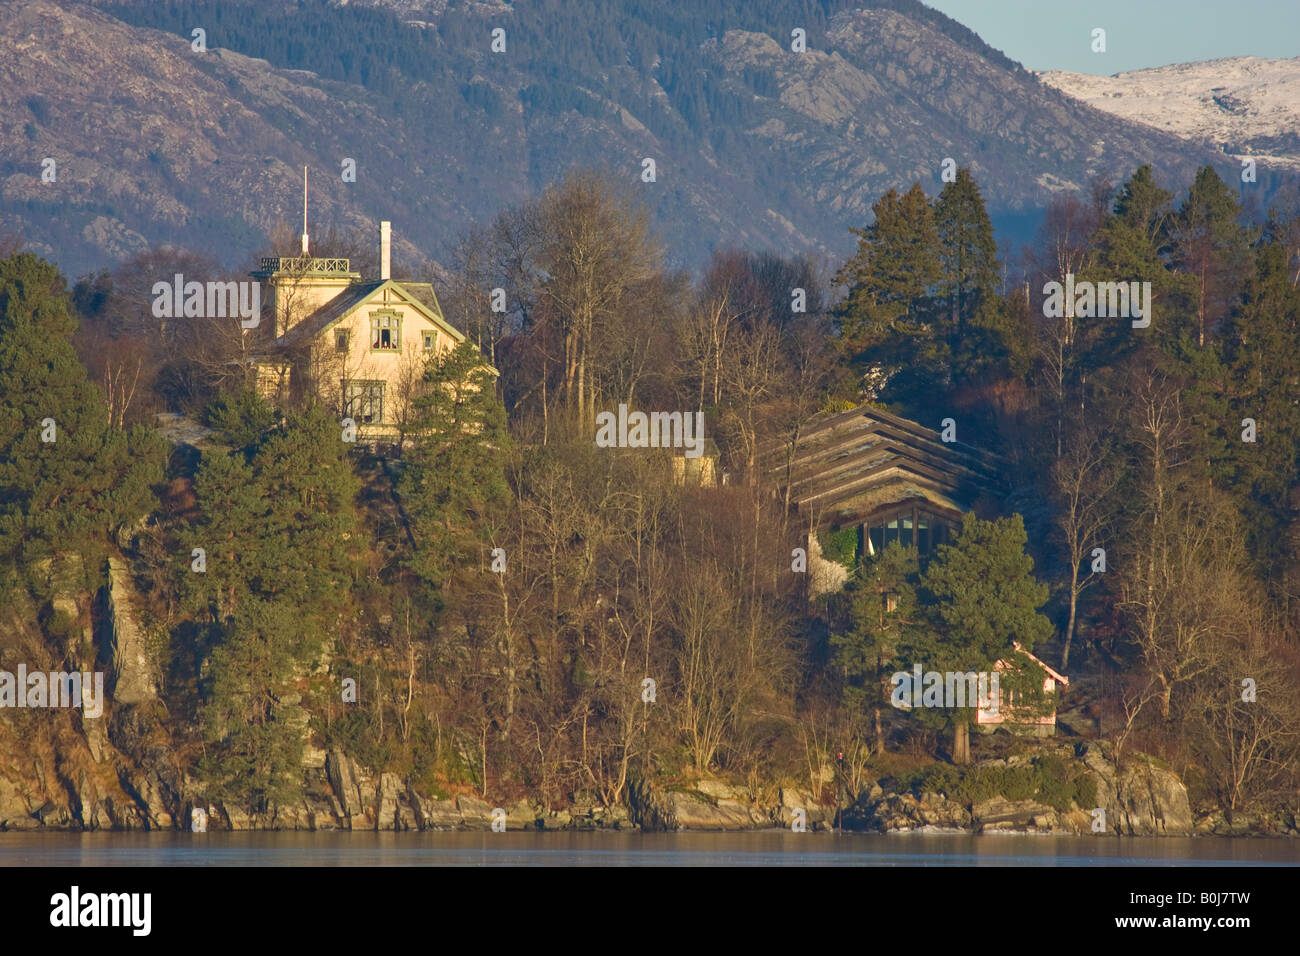 Edvard Grieg's home, Troldhaugen, now a museum, a cold winter day. Seen from across Nordaasvannet Lake, Bergen, Norway. Mount Løvstaakken to the left. Stock Photo